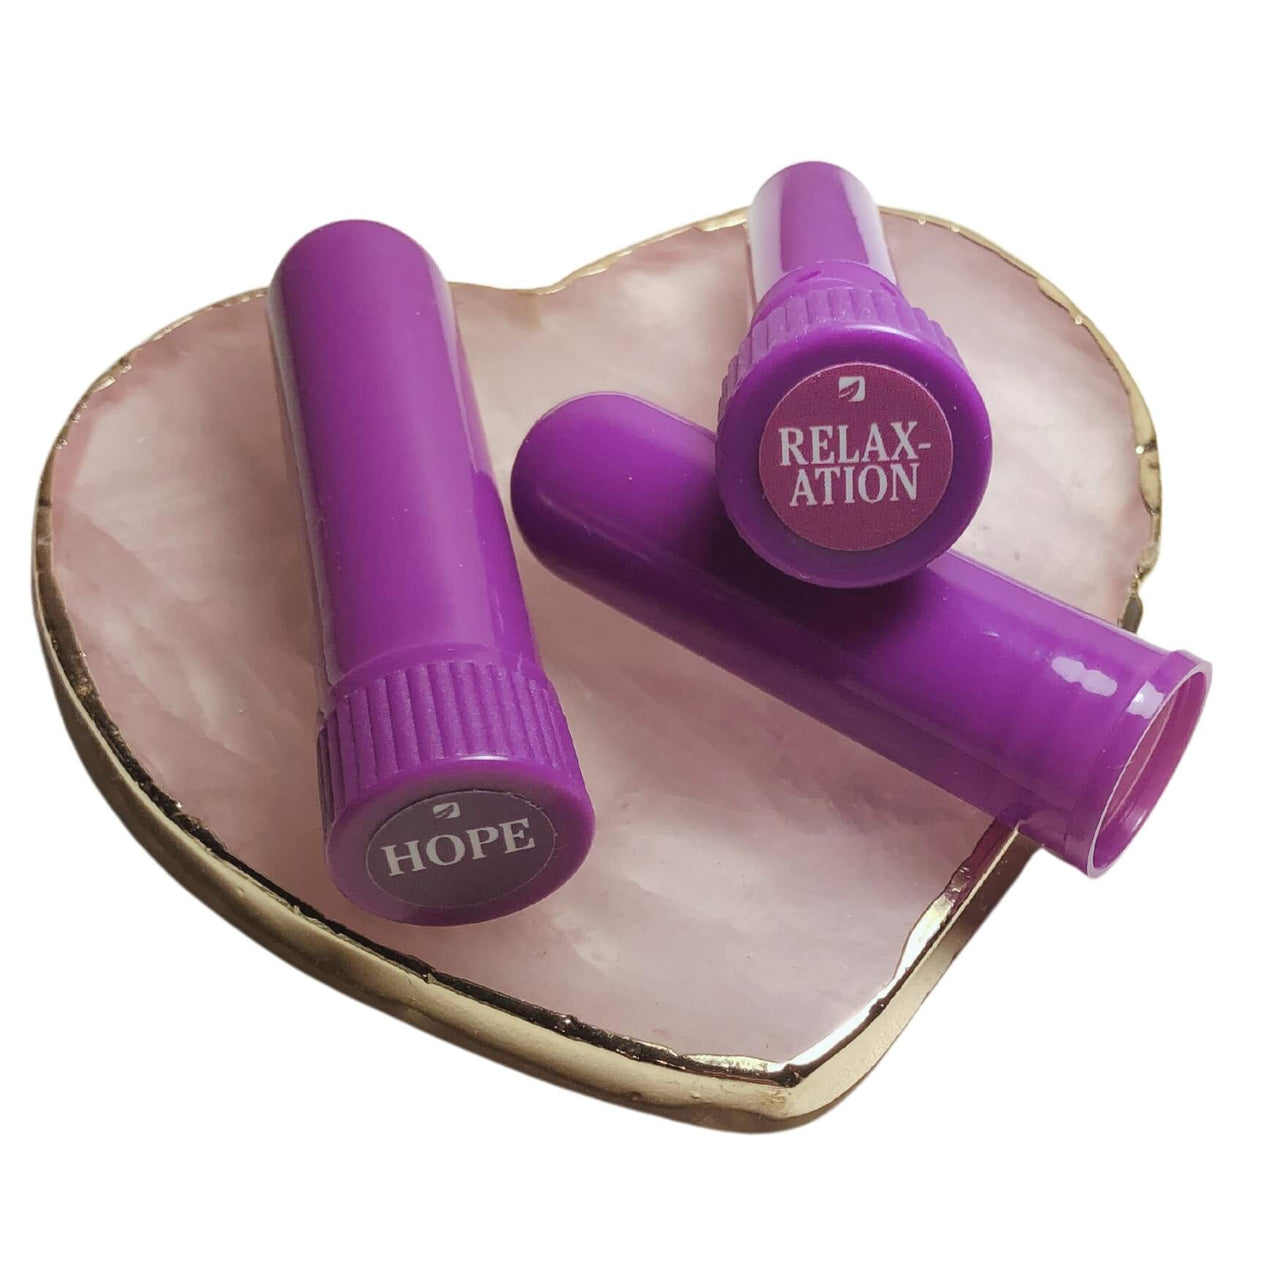 Hope and Relaxation Essential Oil Inhaler Blends